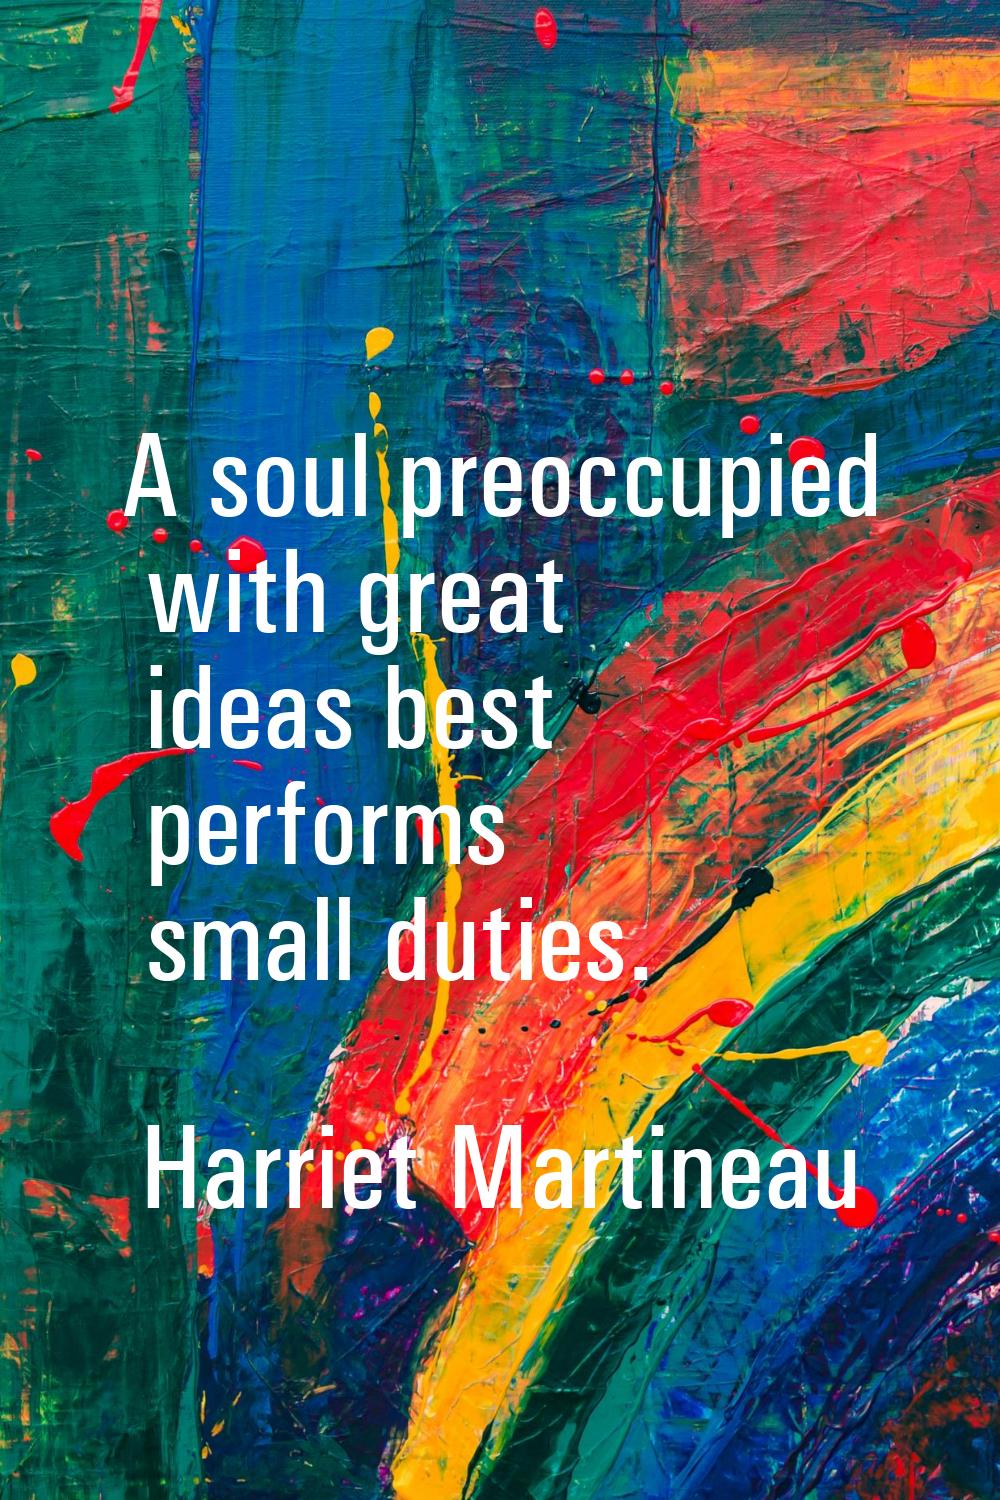 A soul preoccupied with great ideas best performs small duties.